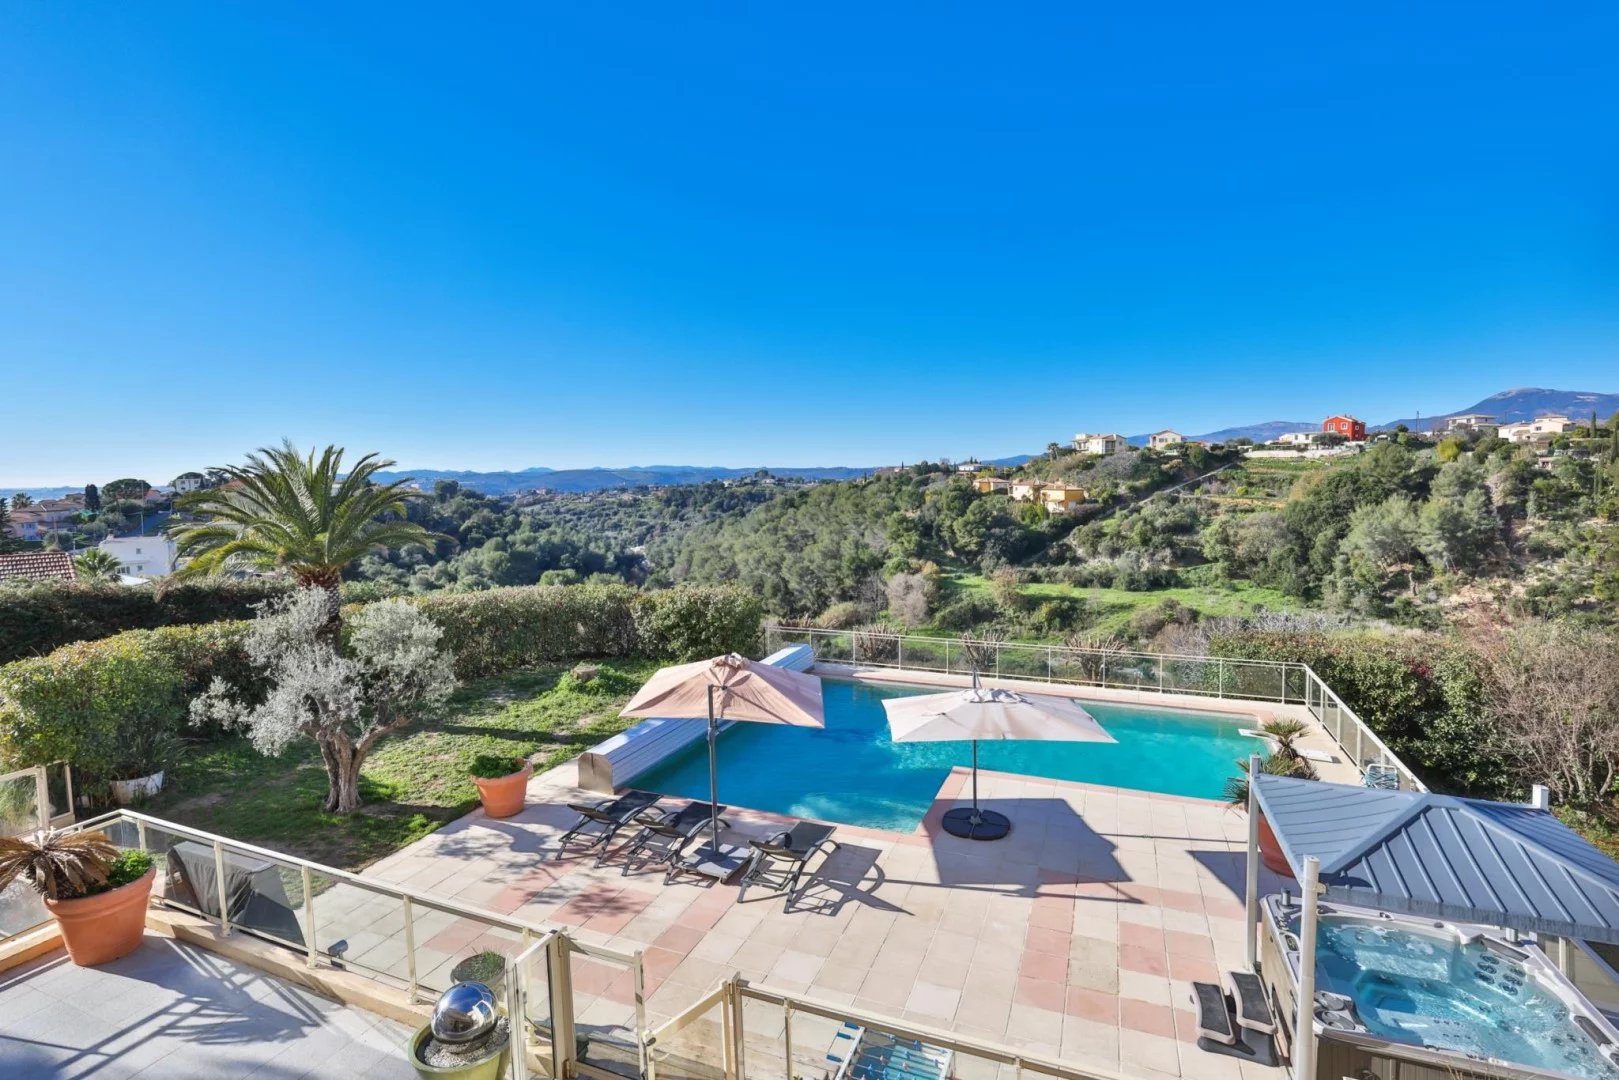 On the Côte d'Azur, magnificent villa in absolute calm, dominant position, swimming pool, large garage and soccer pitch in a residential area